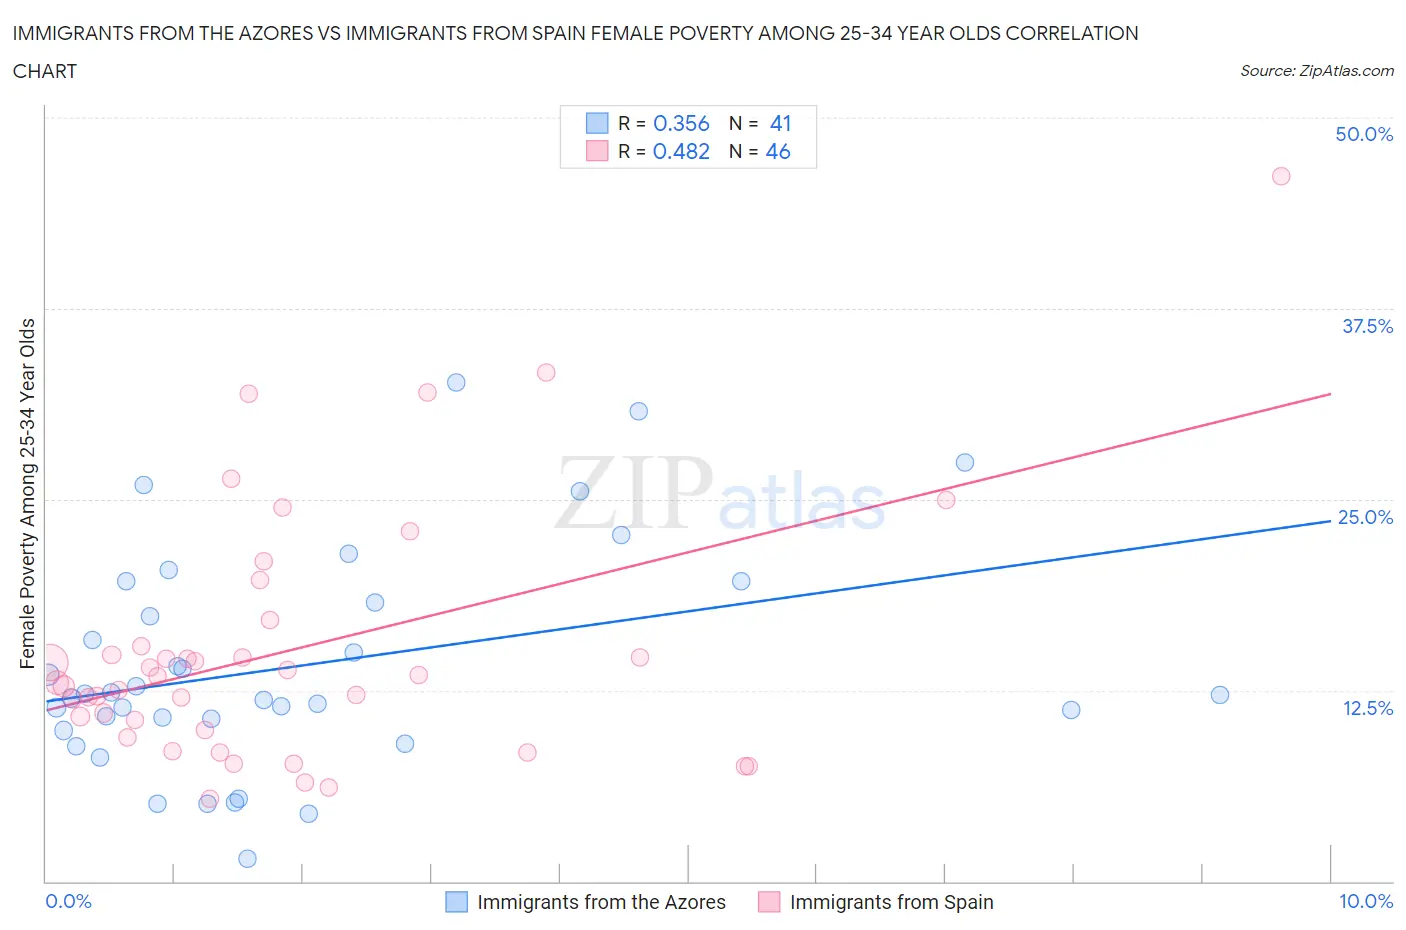 Immigrants from the Azores vs Immigrants from Spain Female Poverty Among 25-34 Year Olds